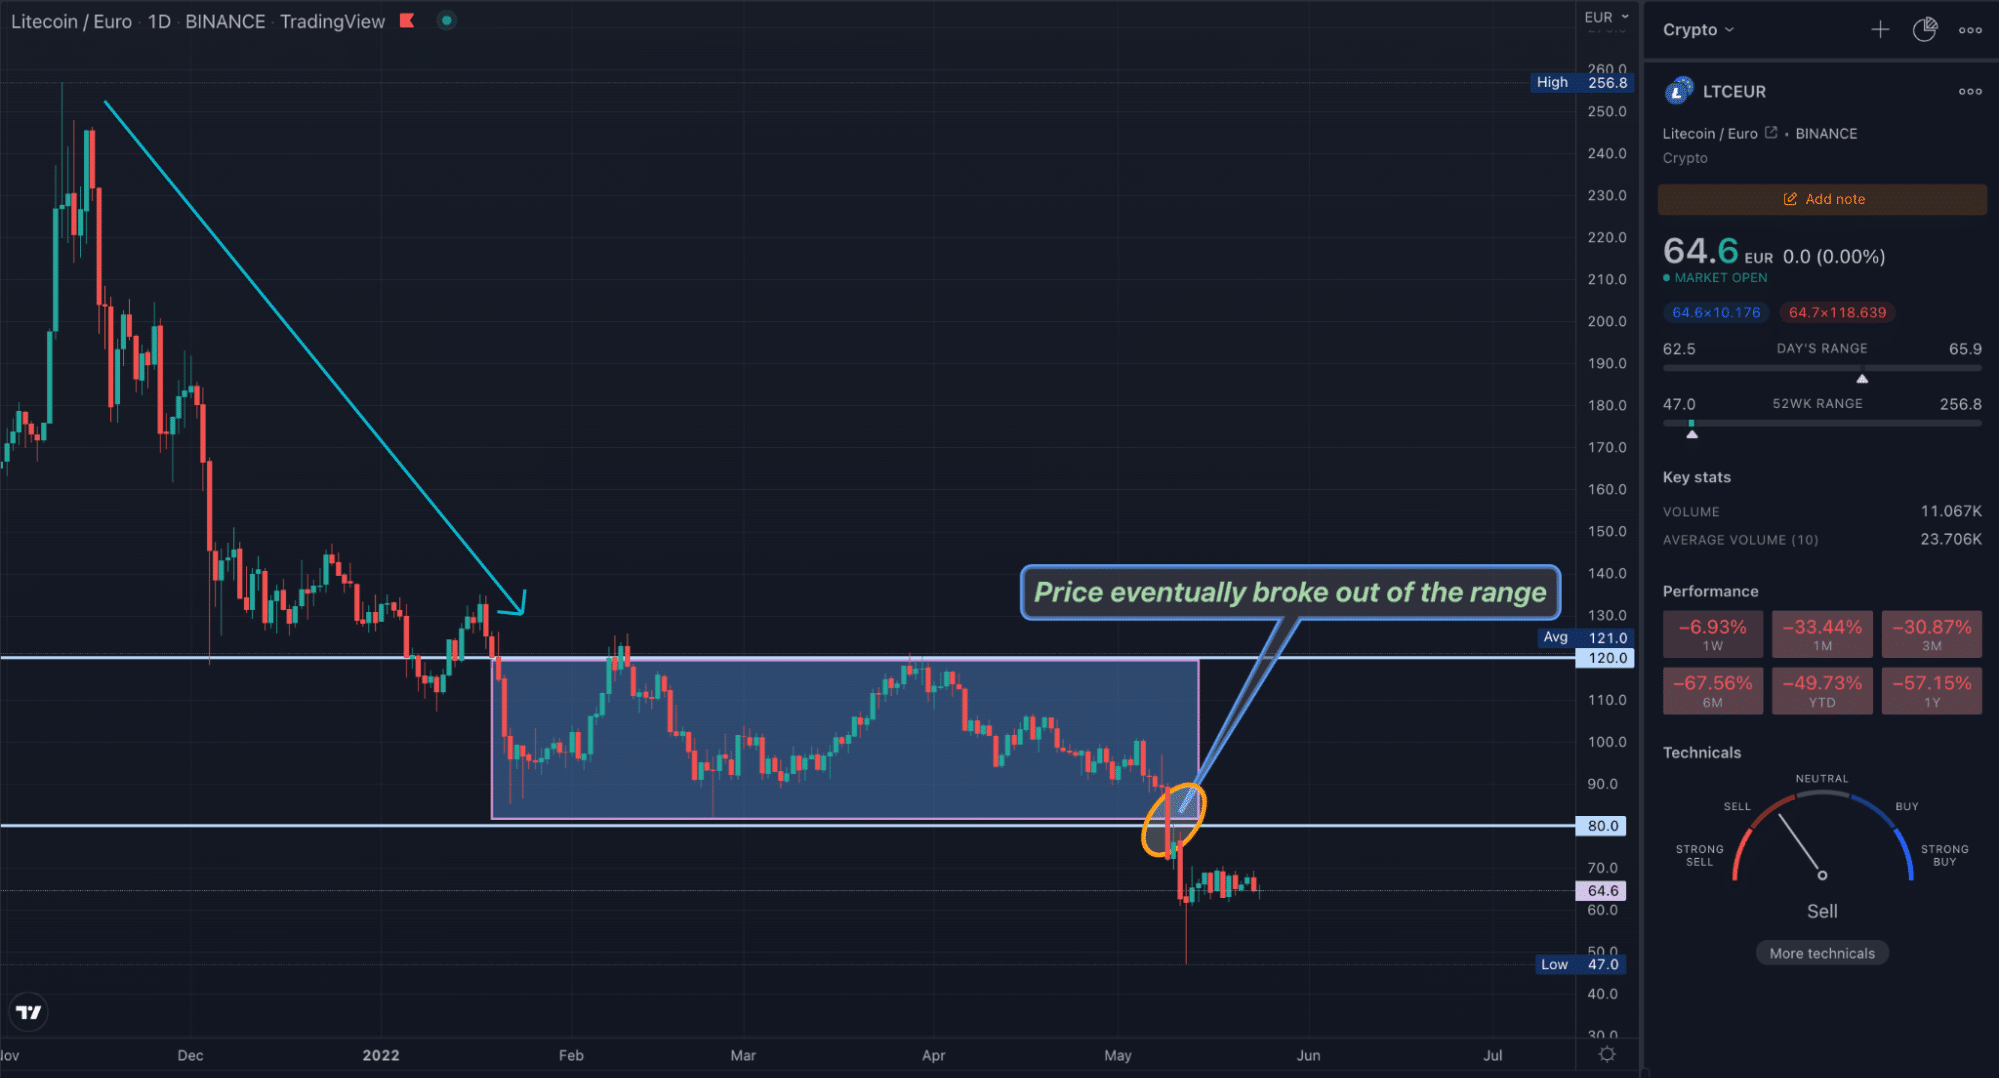 LTCEUR TradingView daily chart showing a breakout in a range